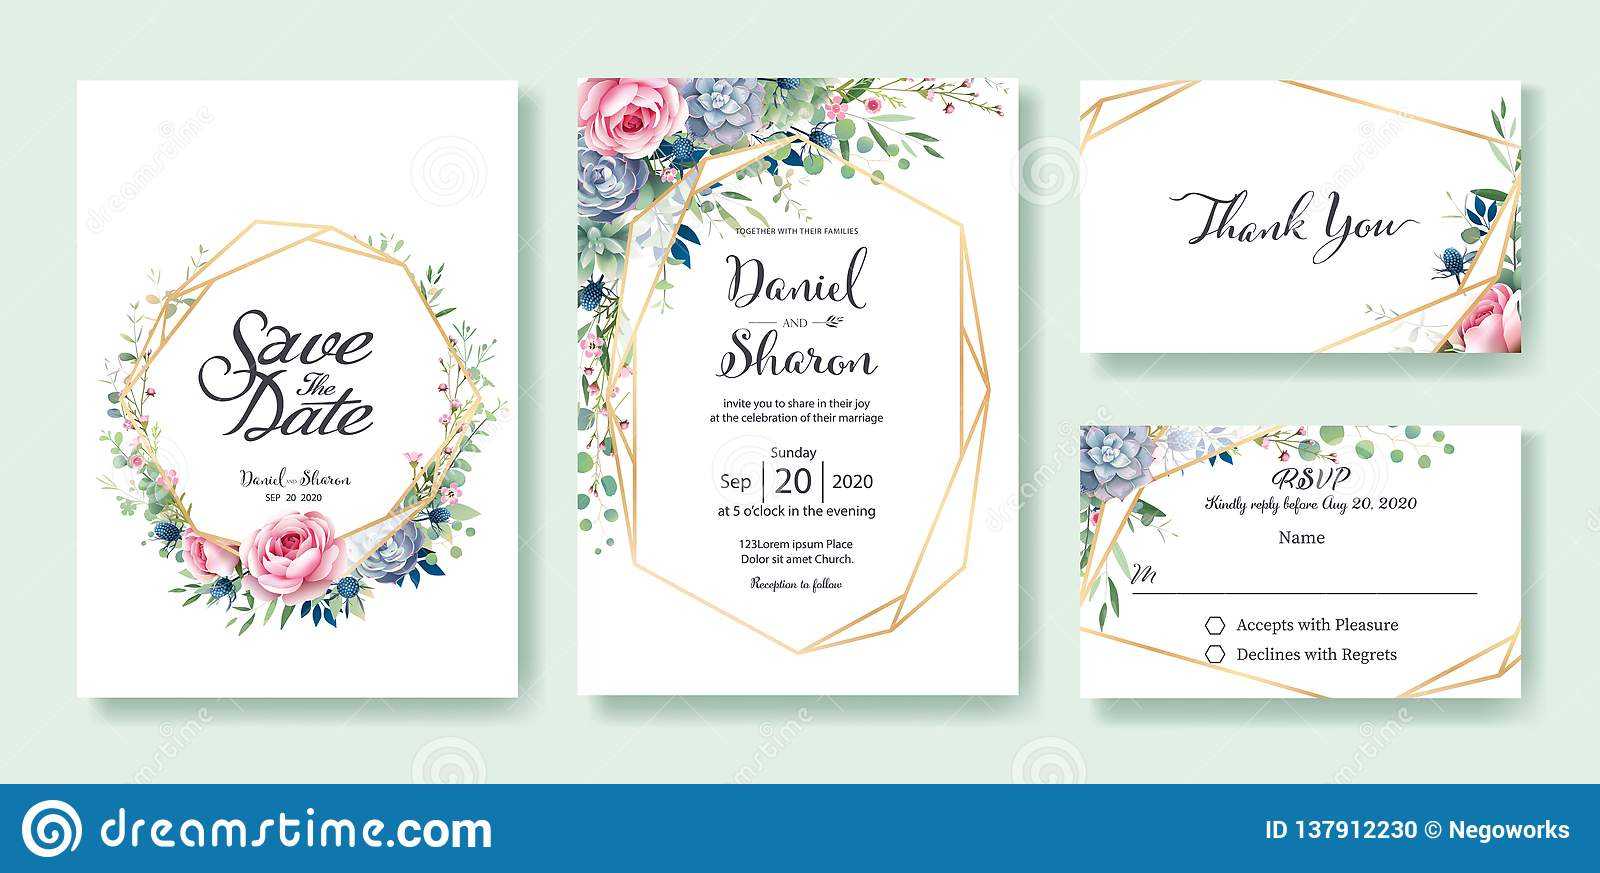 Wedding Invitation, Save The Date, Thank You, Rsvp Card Intended For Free Printable Wedding Rsvp Card Templates